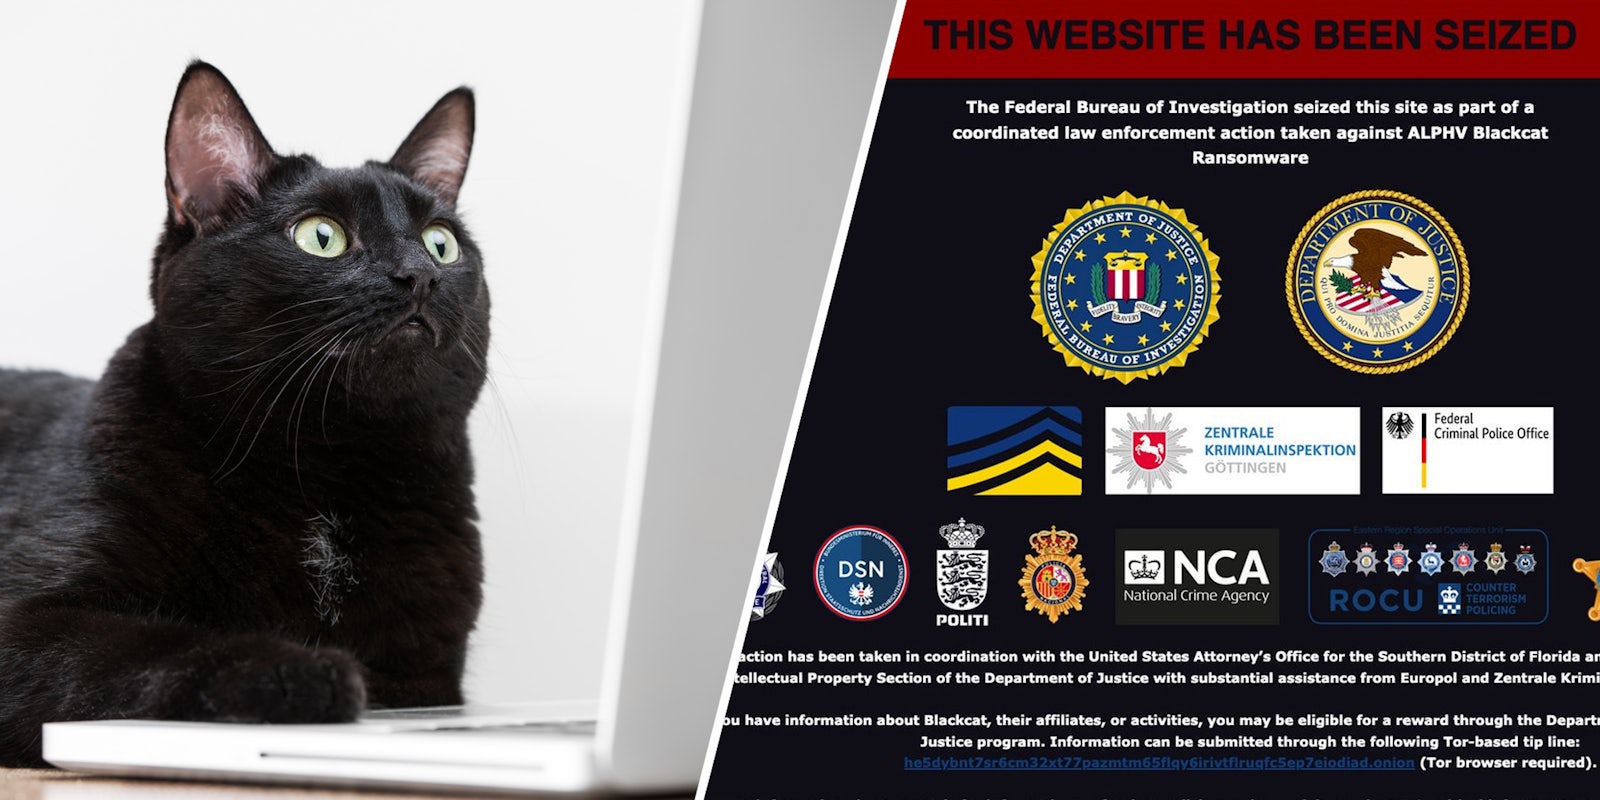 Black cat on computer(l), Website has been seized(r)